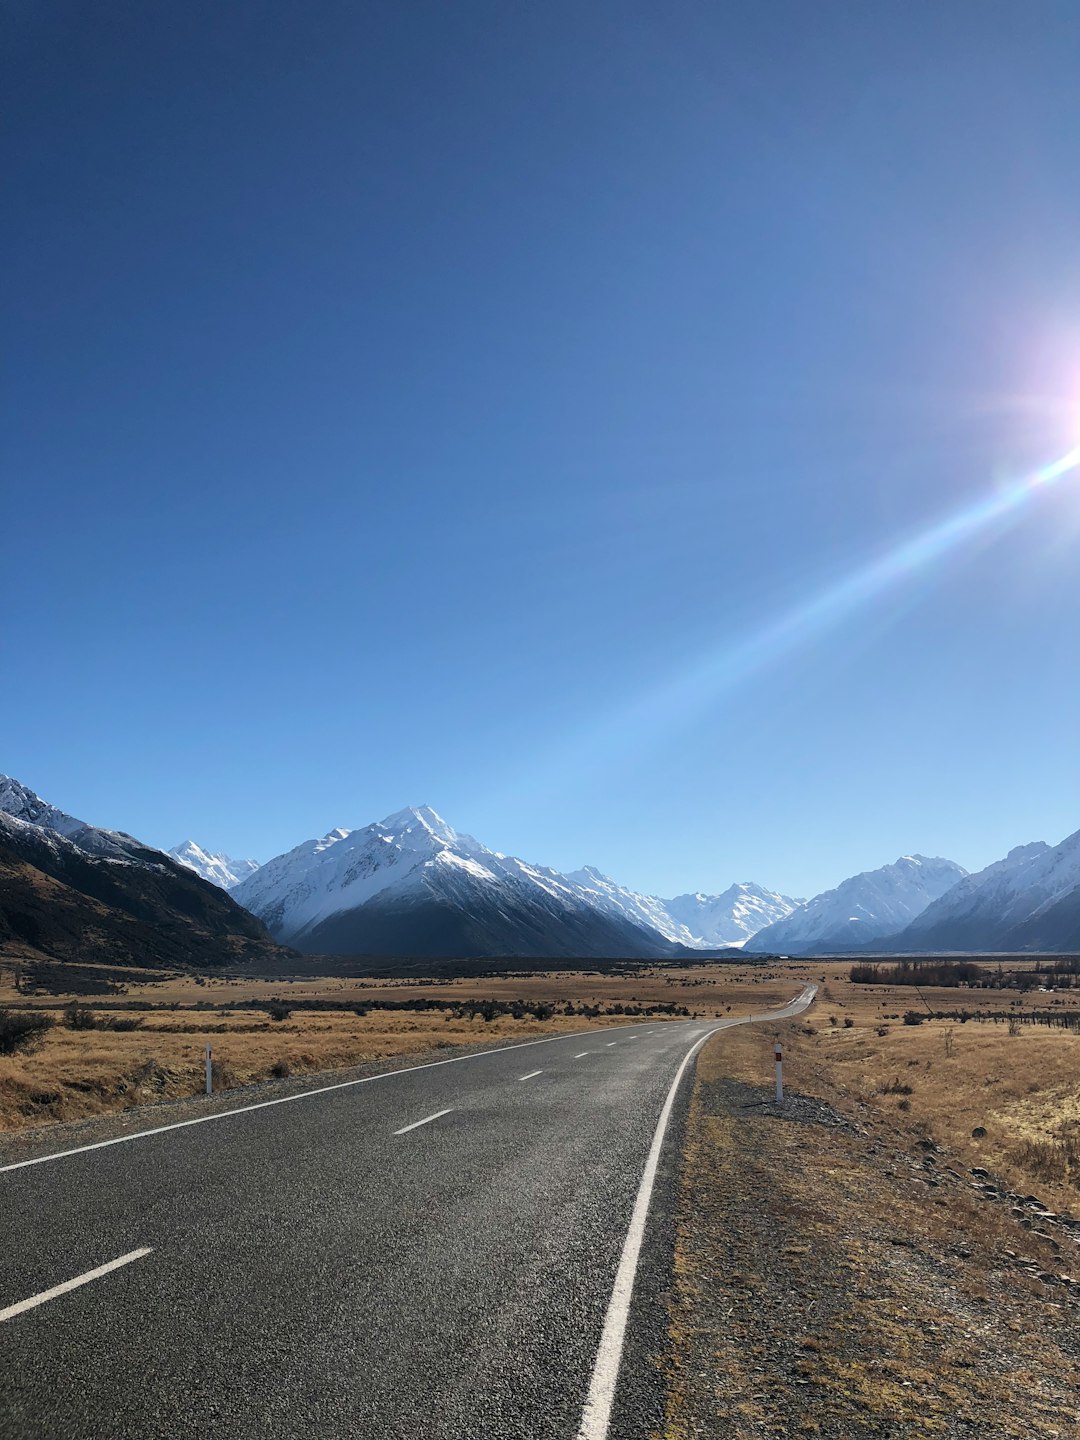 travelers stories about Road trip in Aoraki/Mount Cook National Park, New Zealand